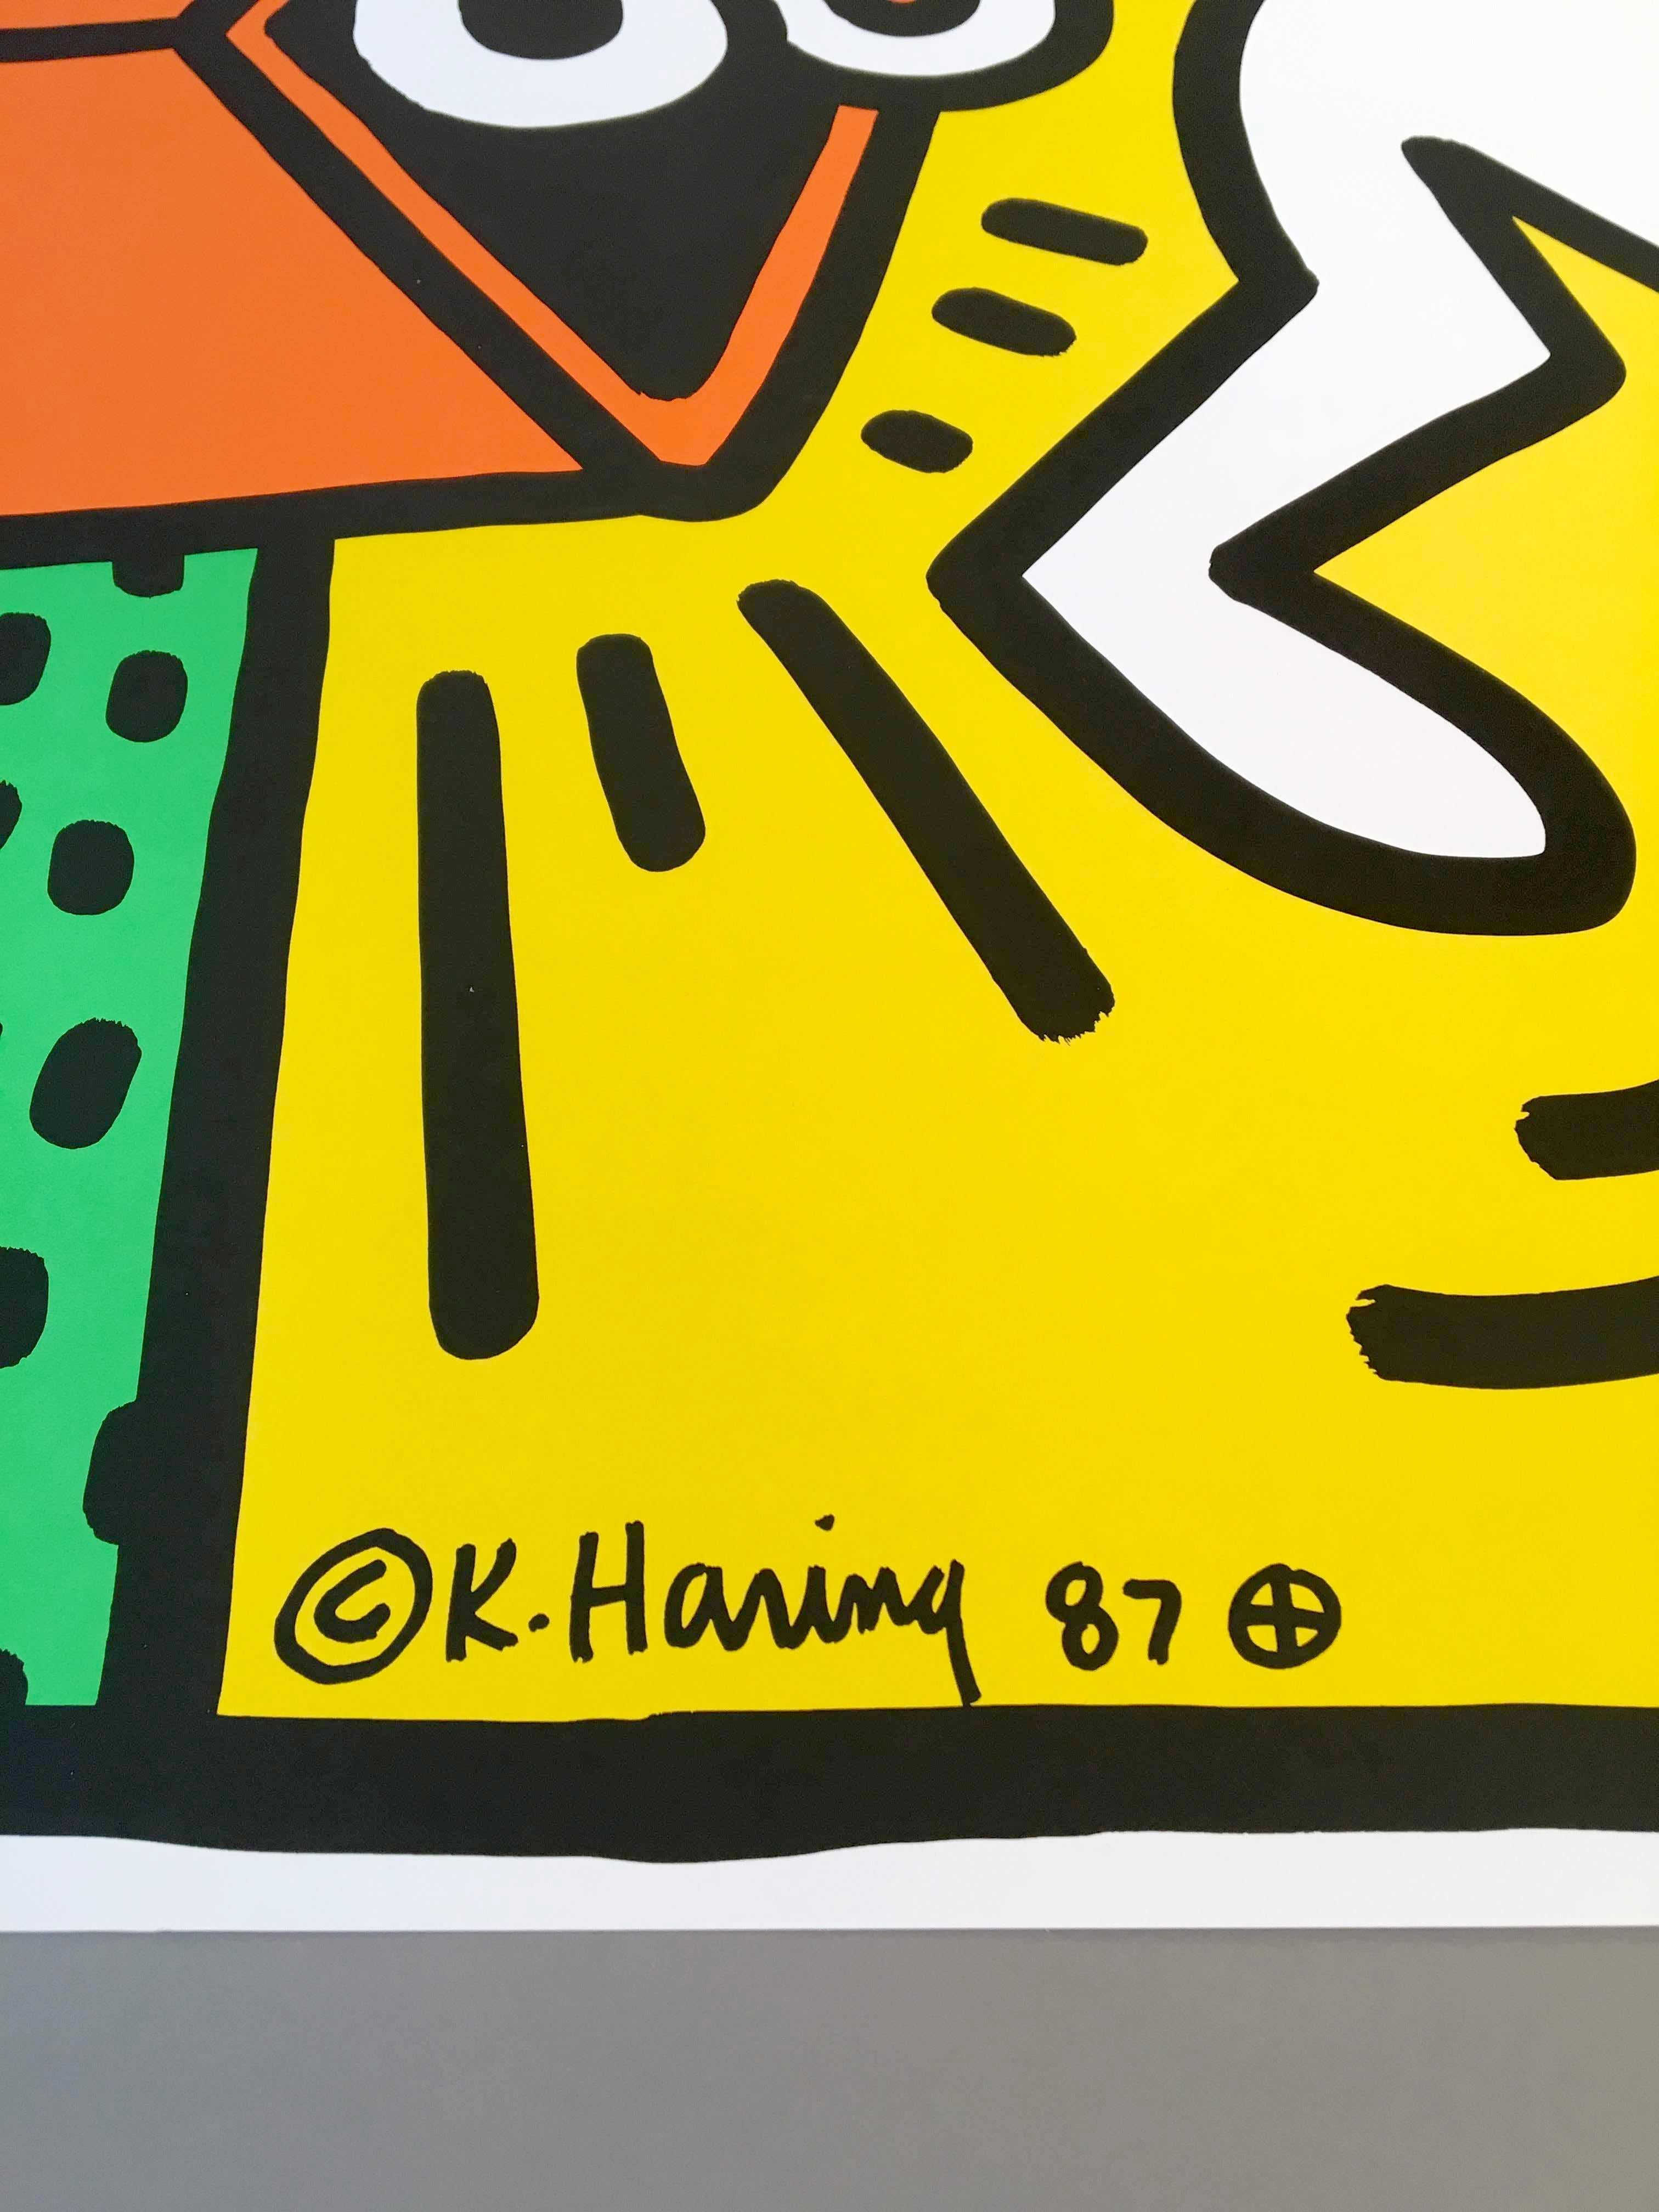 Keith Haring 'Lucky Strike II' Rare Original 1987 Poster Print on Wove Paper For Sale 1